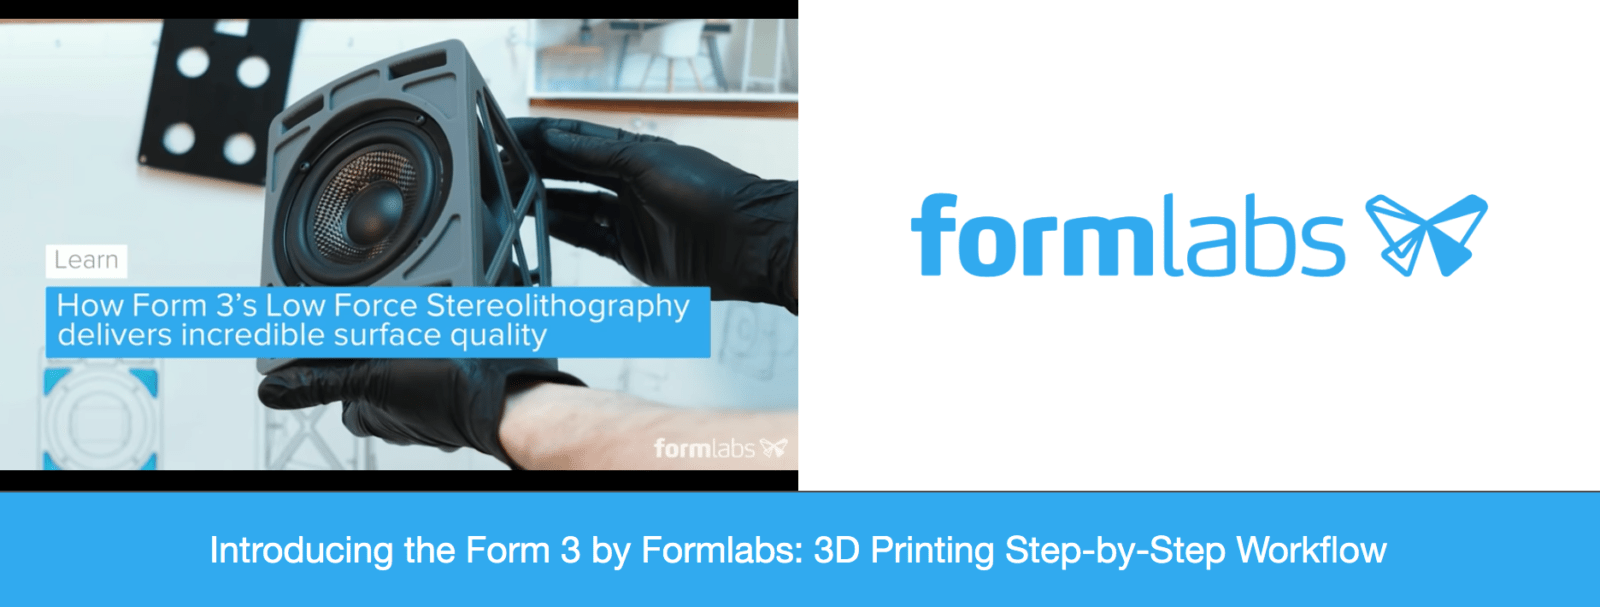 Introducing the Form 3 by Formlabs: 3D Printing Step-by-Step Workflow